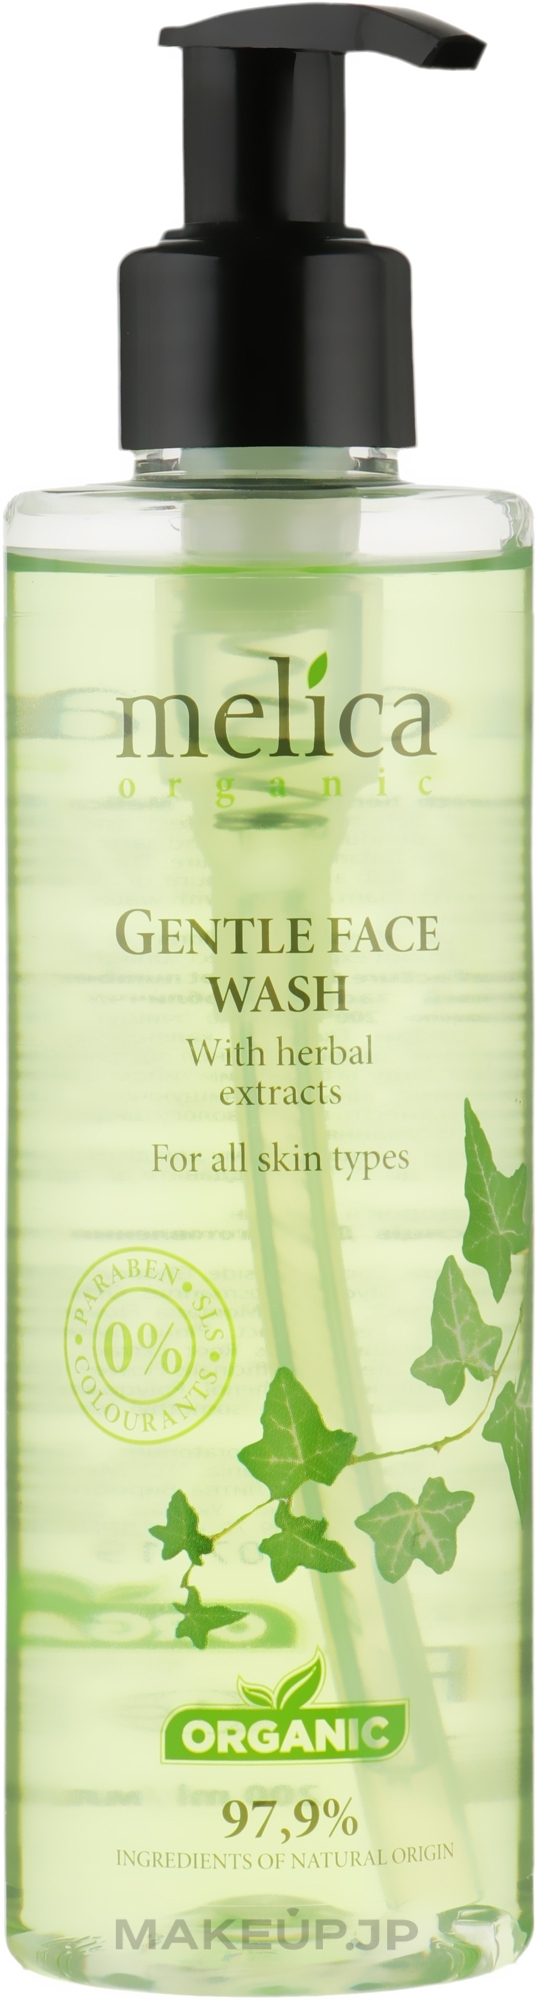 Gentle Facial Cleanser with Herbal Extracts - Melica Organic Gentle Face Wash — photo 200 ml